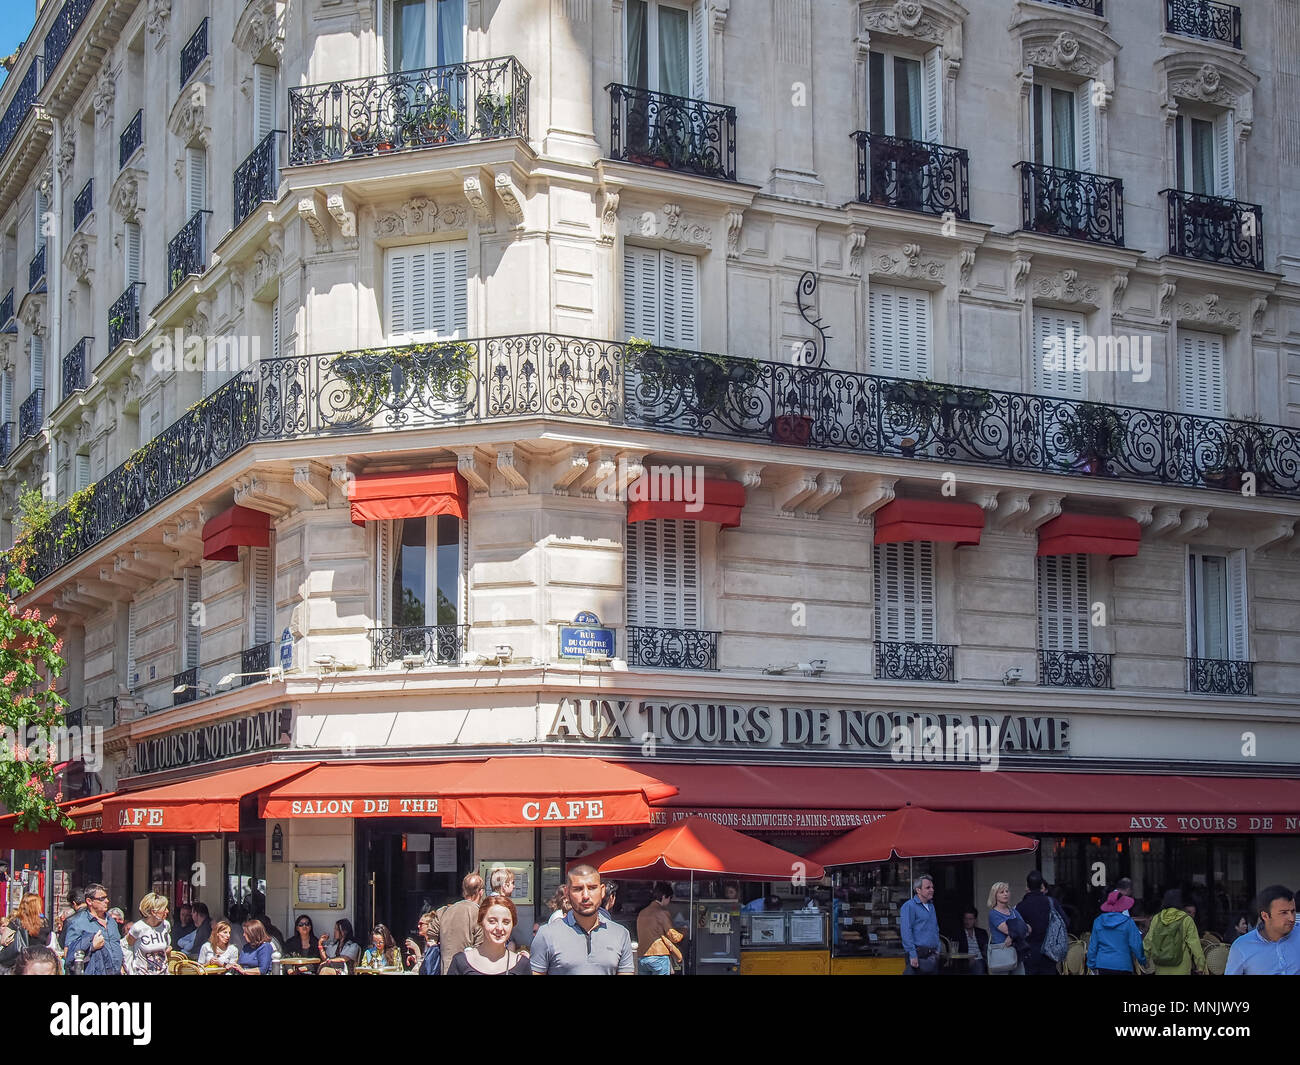 PARIS, FRANCE-MAY 5, 2016: A typical Parisian street architecture Stock Photo